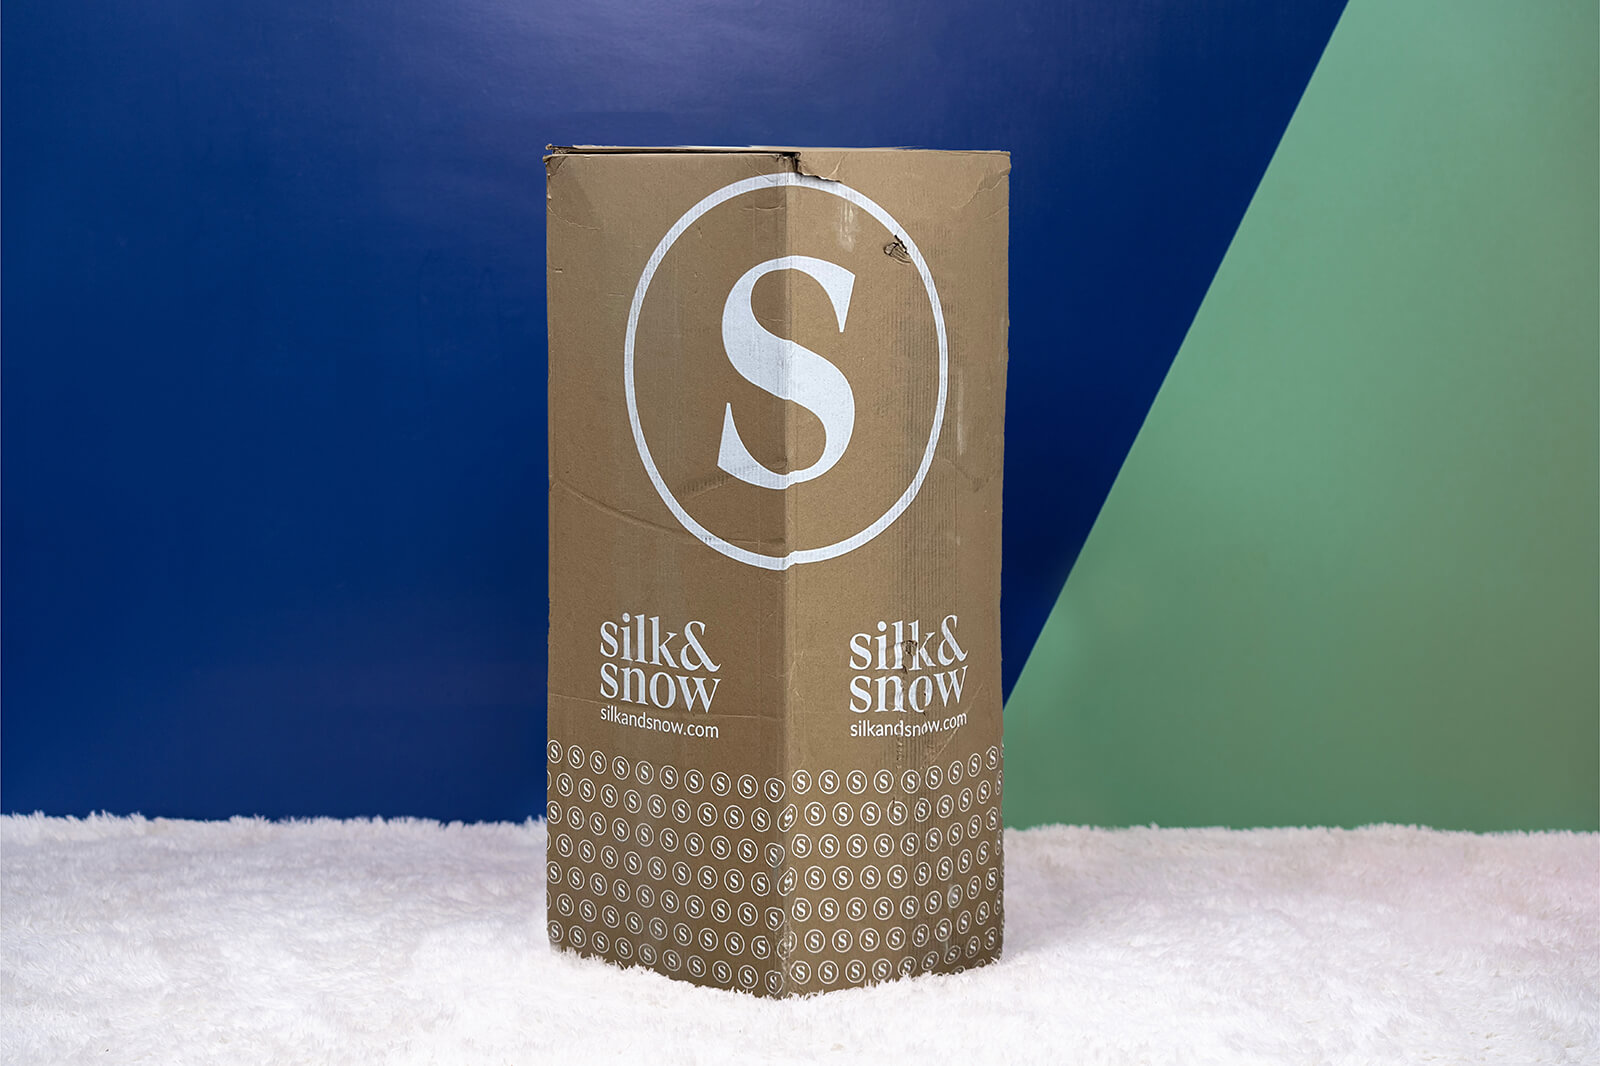 Photo of the Silk and Snow Organic Mattress box on the floor in a bedroom taken from a front angle.